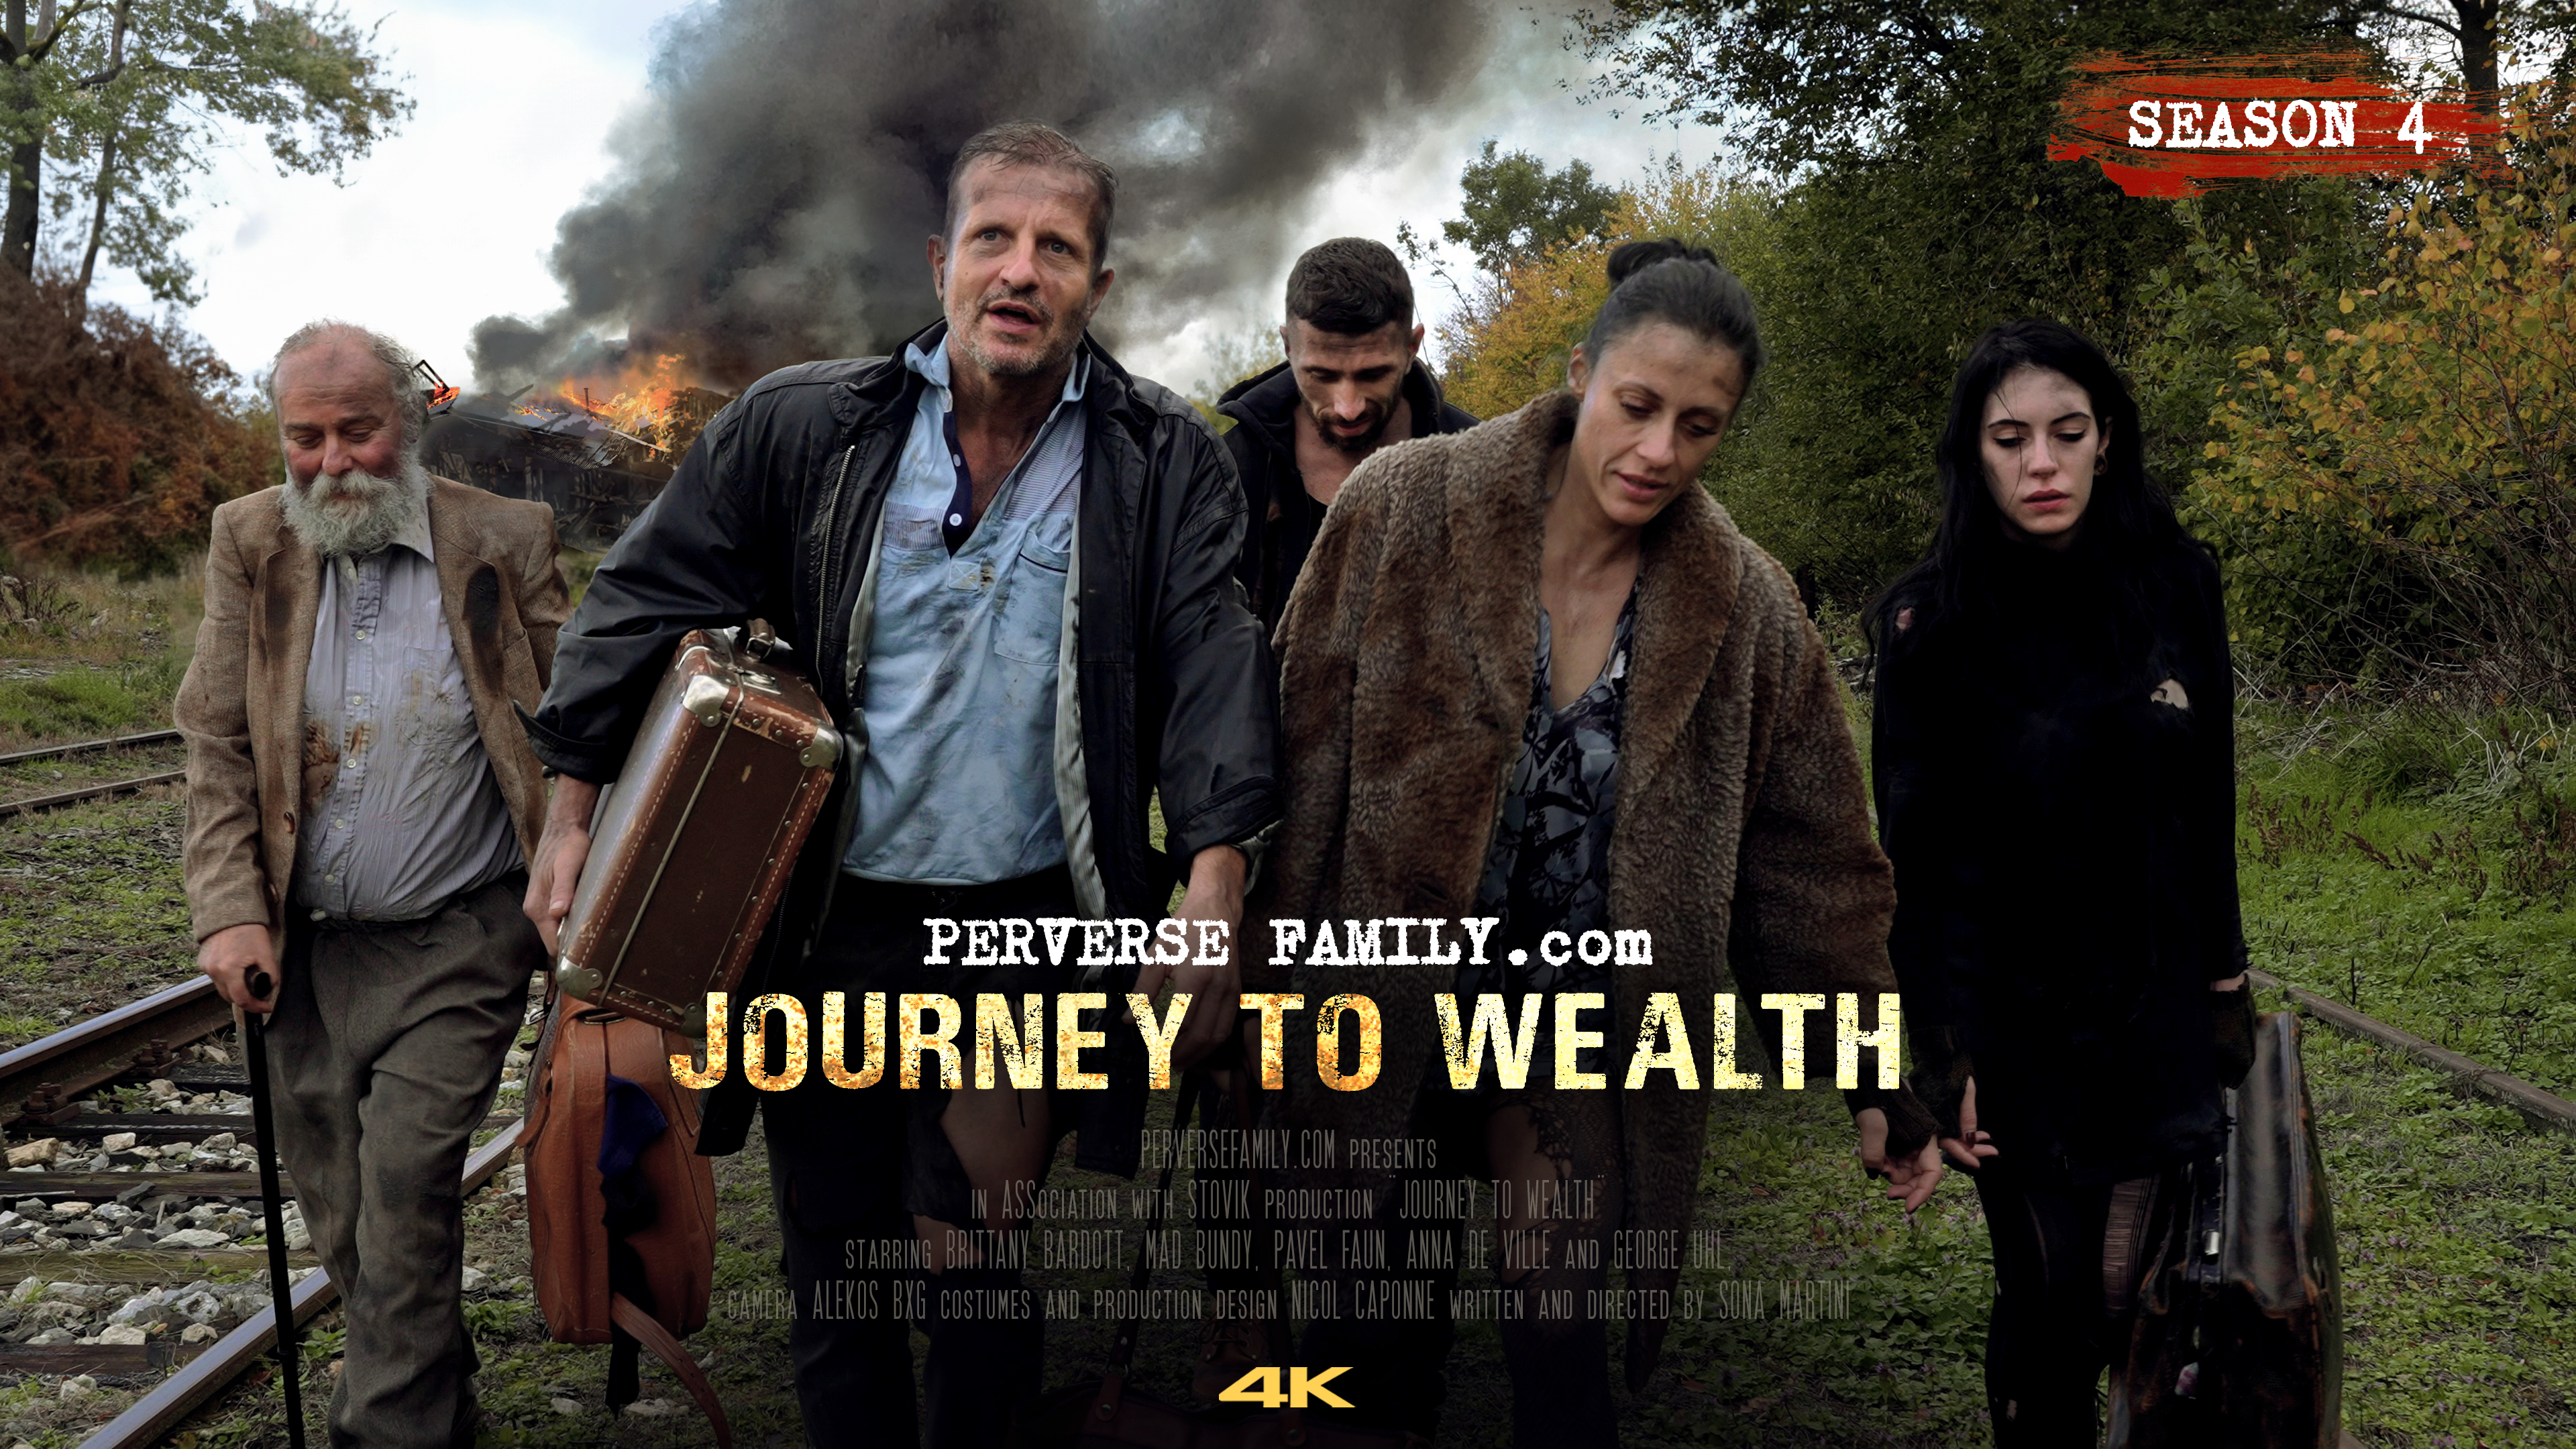 BoundHub - PERVERSE FAMILY - Journey to Wealth